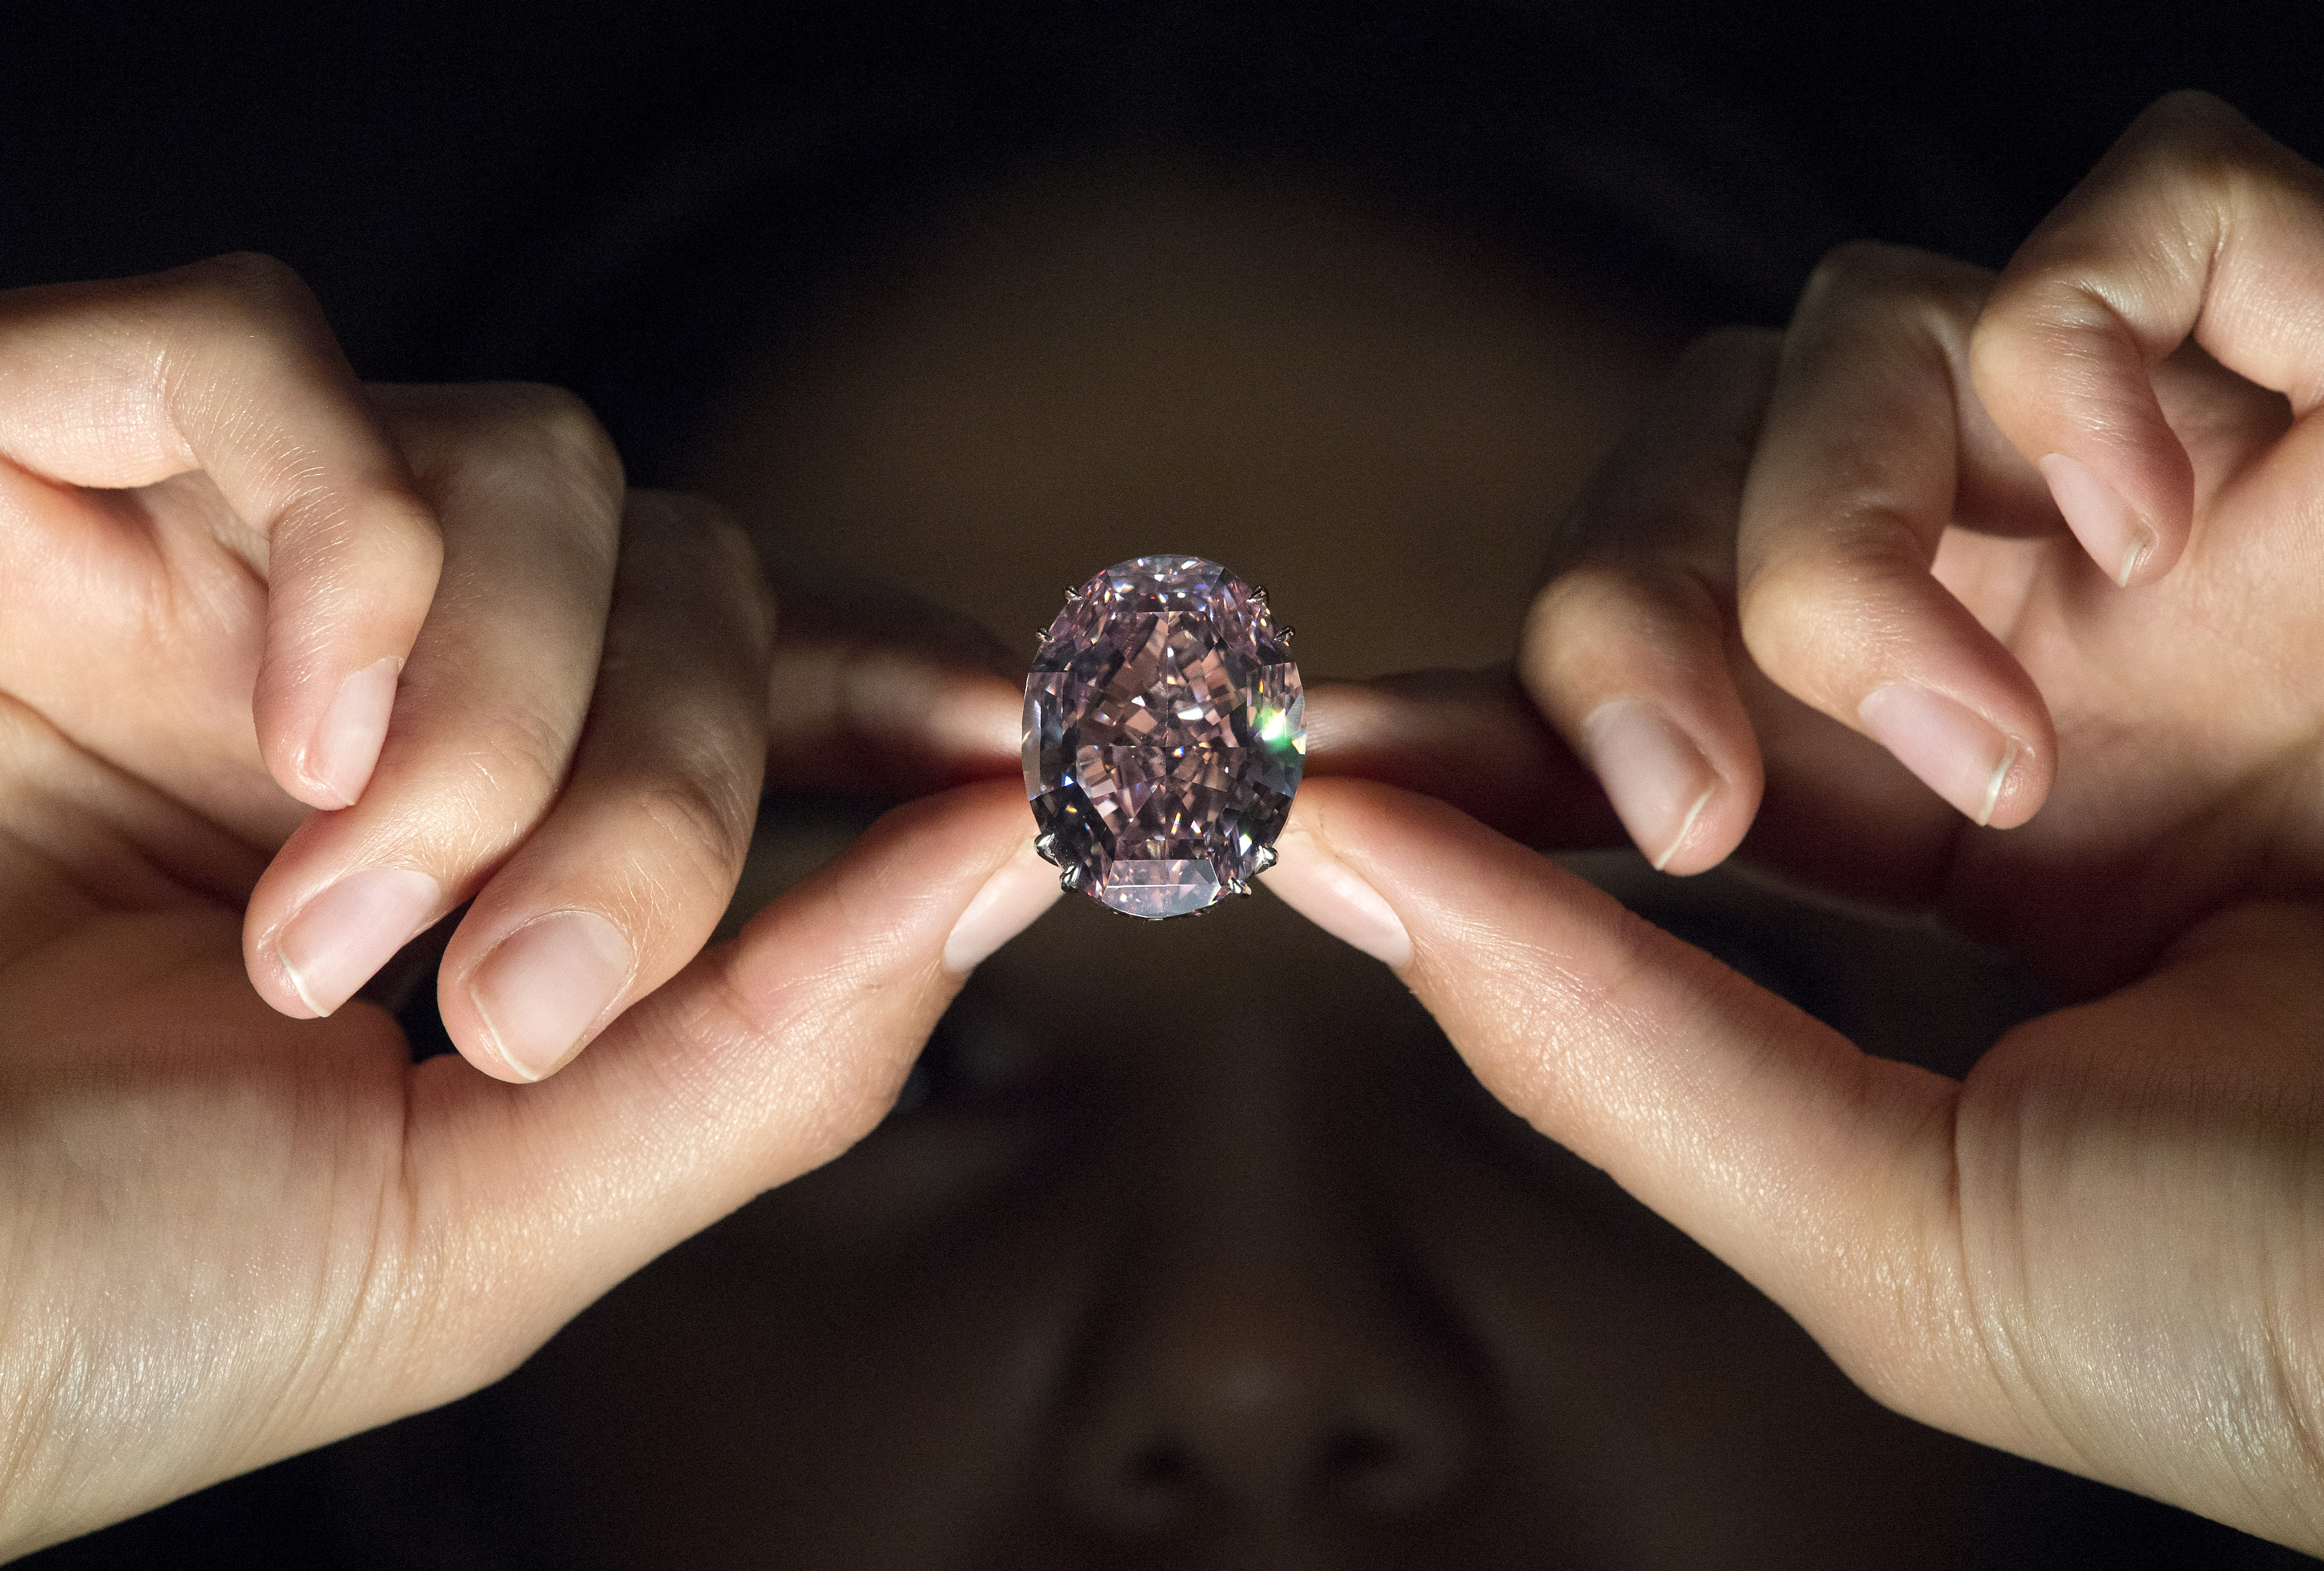 Pink diamond found in Angola believed to be largest in 300 years